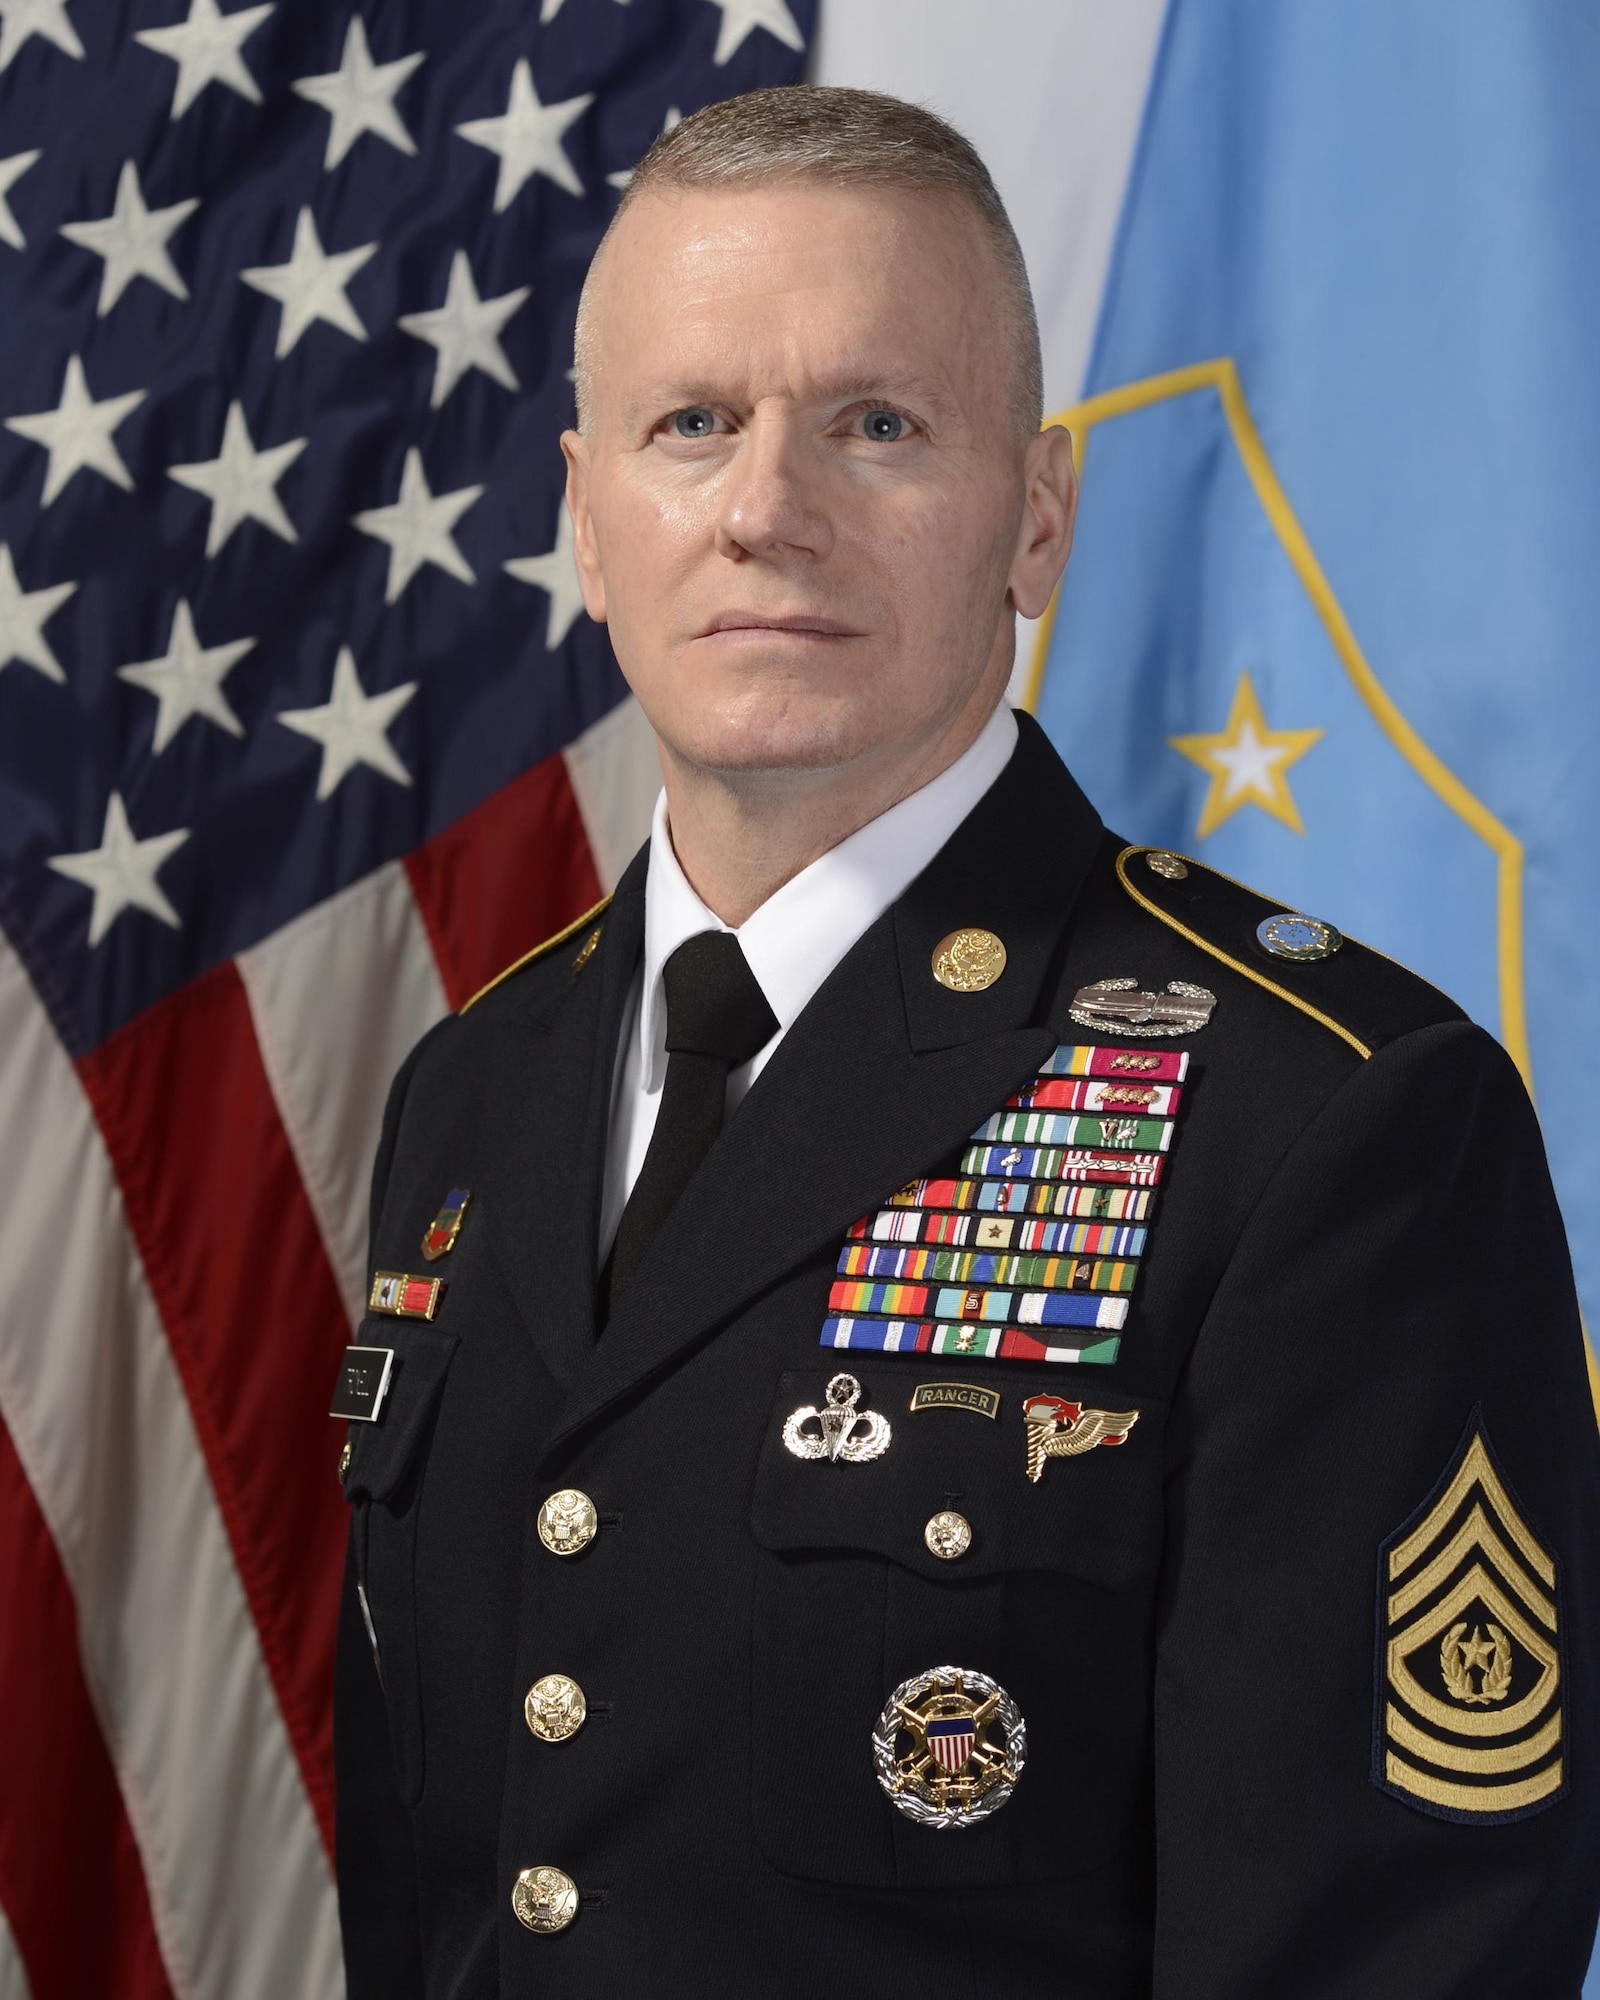 Army Command Sergeant Major John Wayne Troxell is the Senior Enlisted Advisor to the Chairman of the Joint Chiefs of Staff, and the senior noncommissioned officer in the U.S. Armed Forces.  